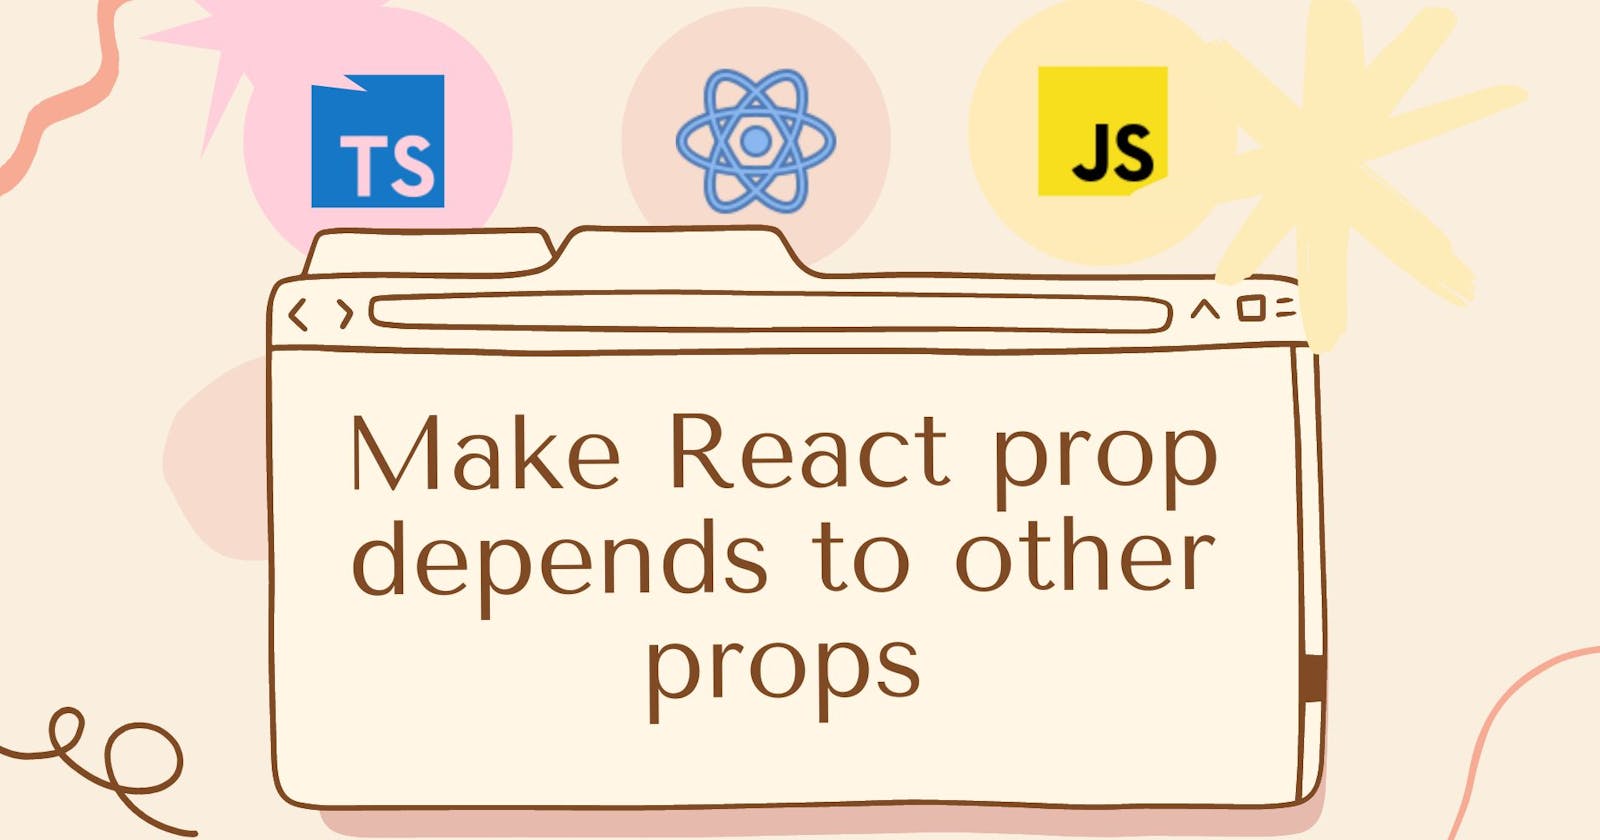 Make React prop depends to other props